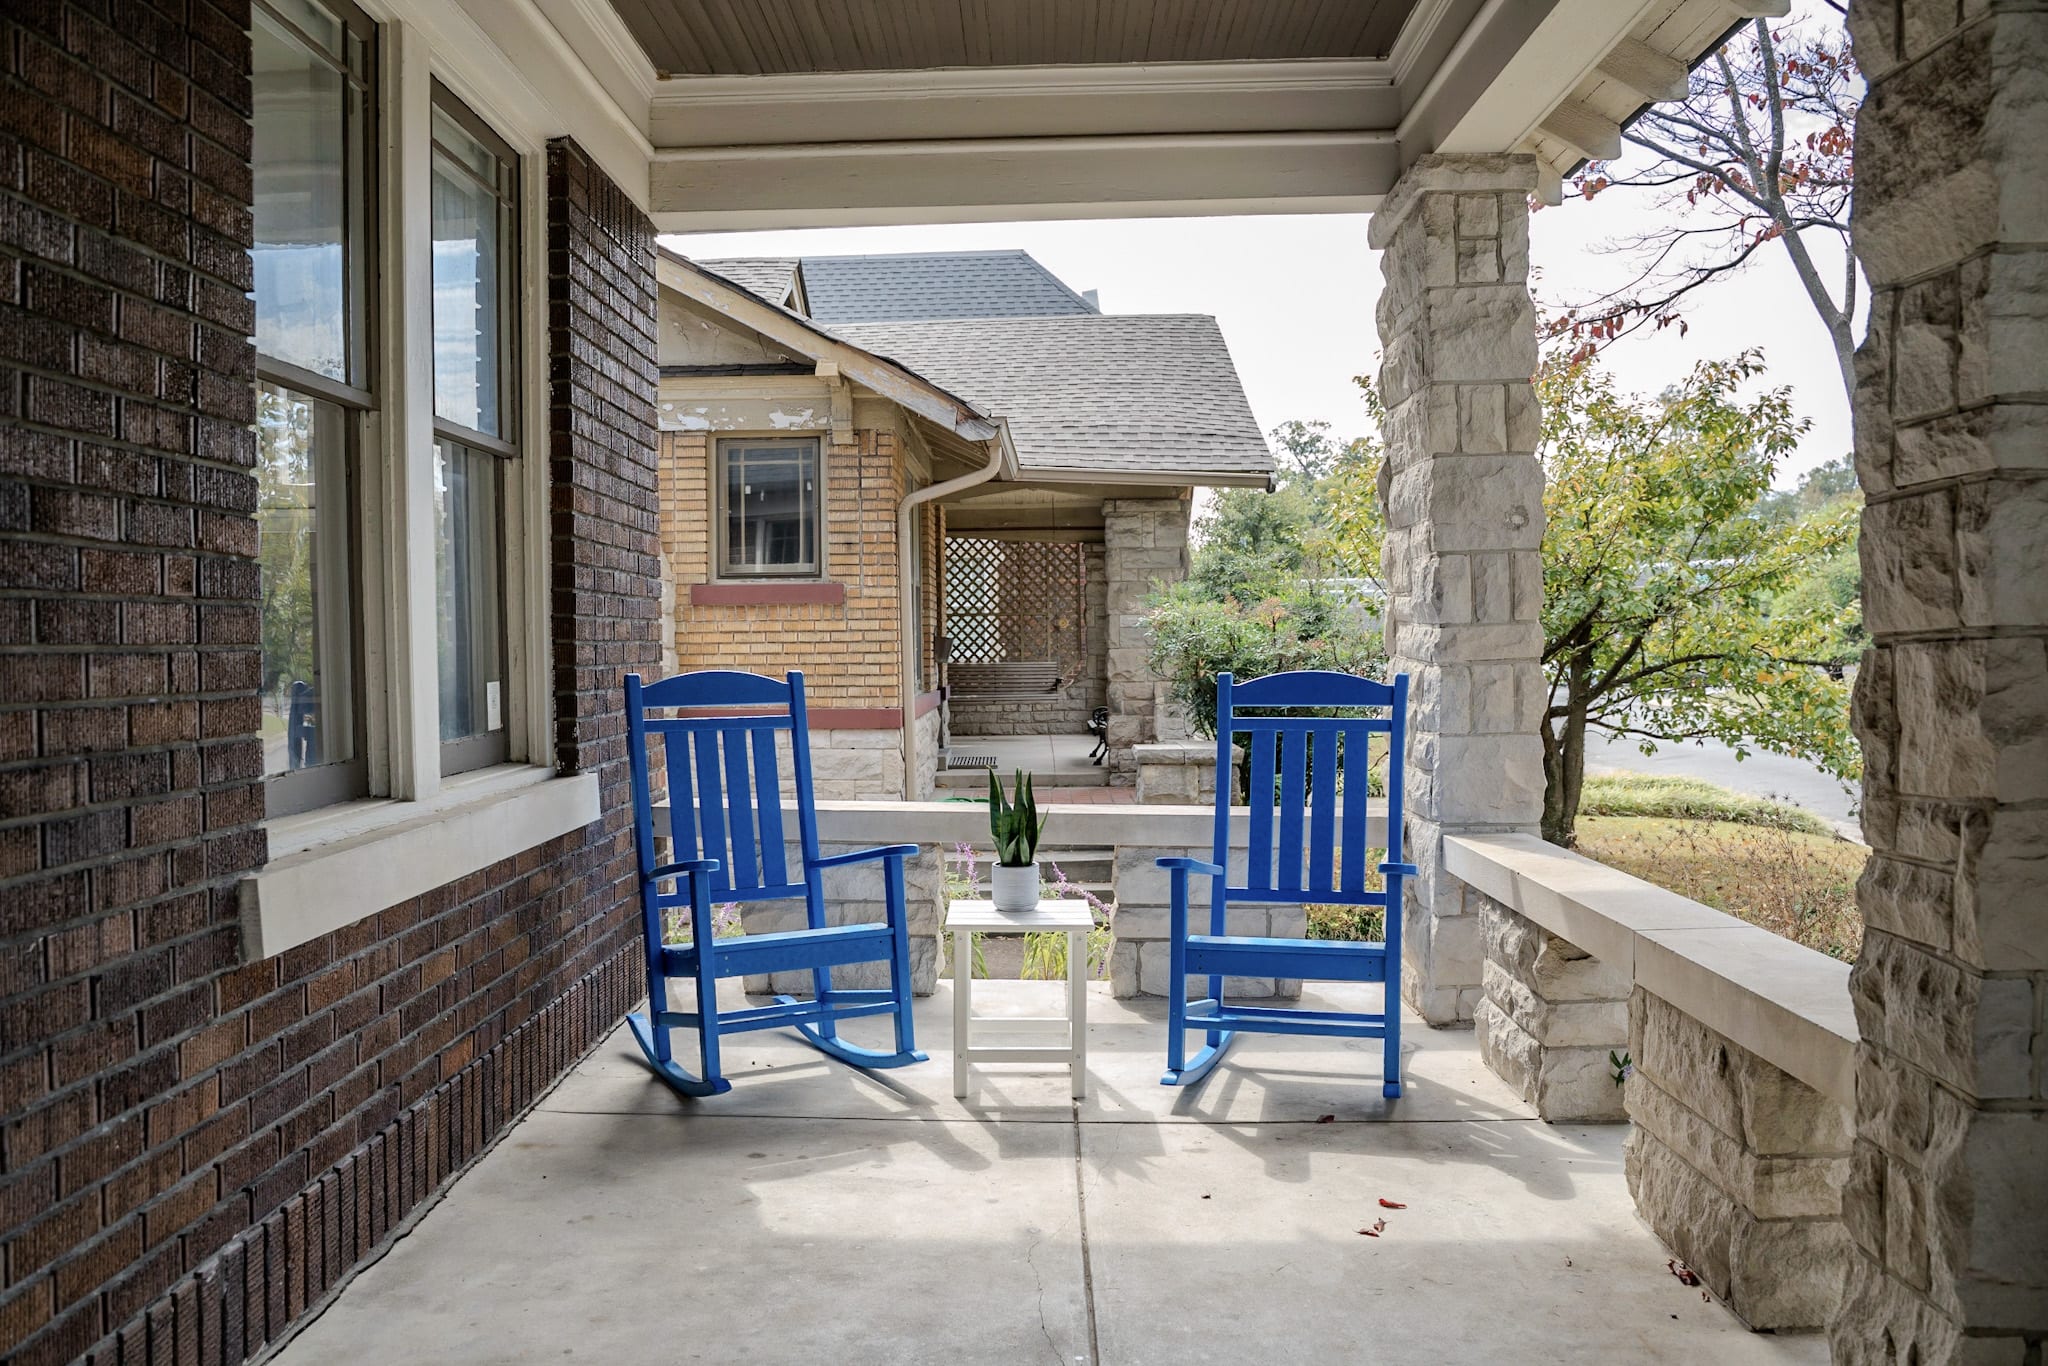 Sit and relax on the front porch!